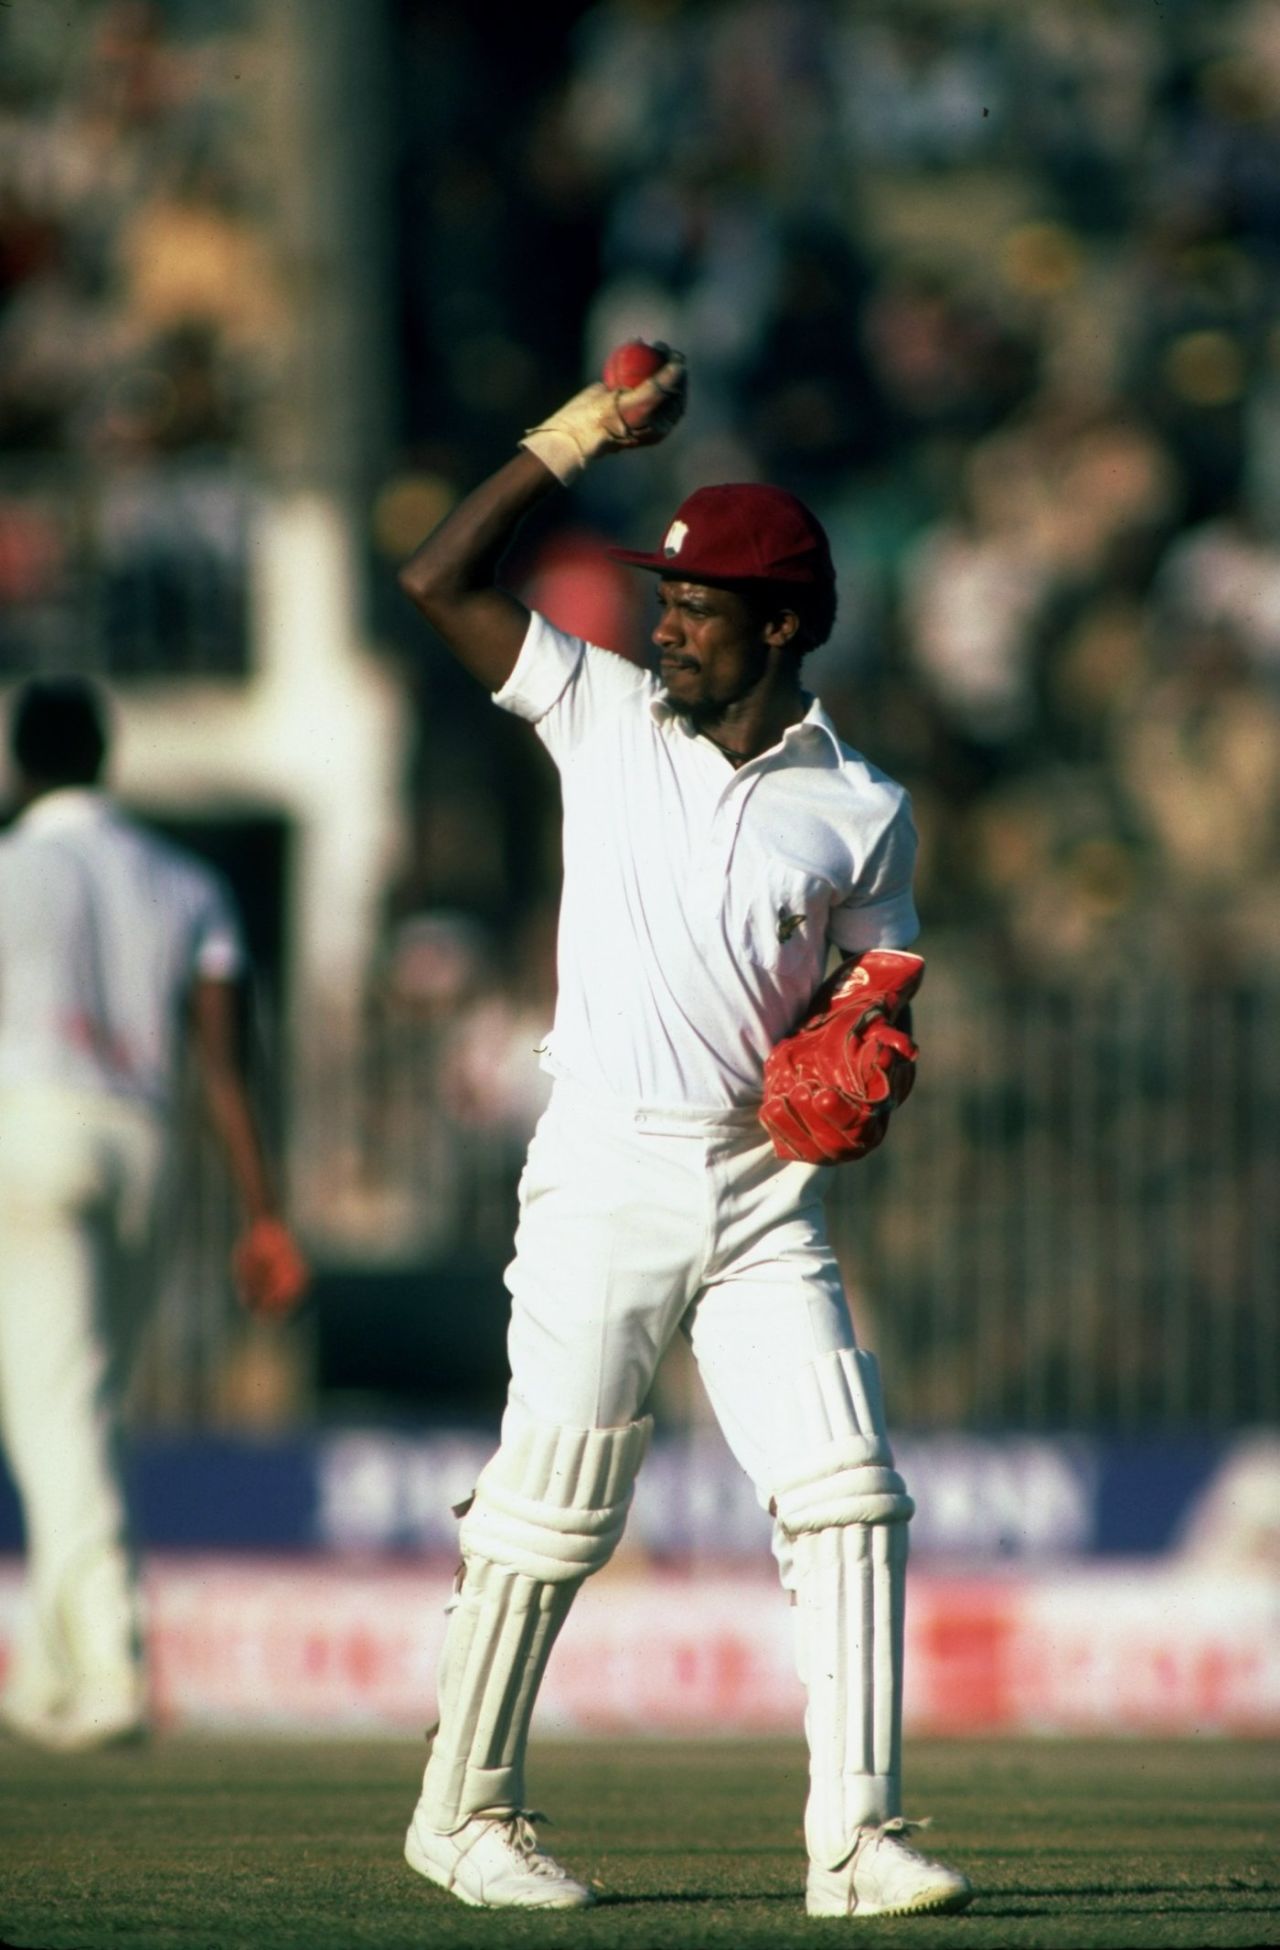 David Murray in action, Pakistan vs West Indies, 2nd Test, Faisalabad, 4th day, December 12, 1980